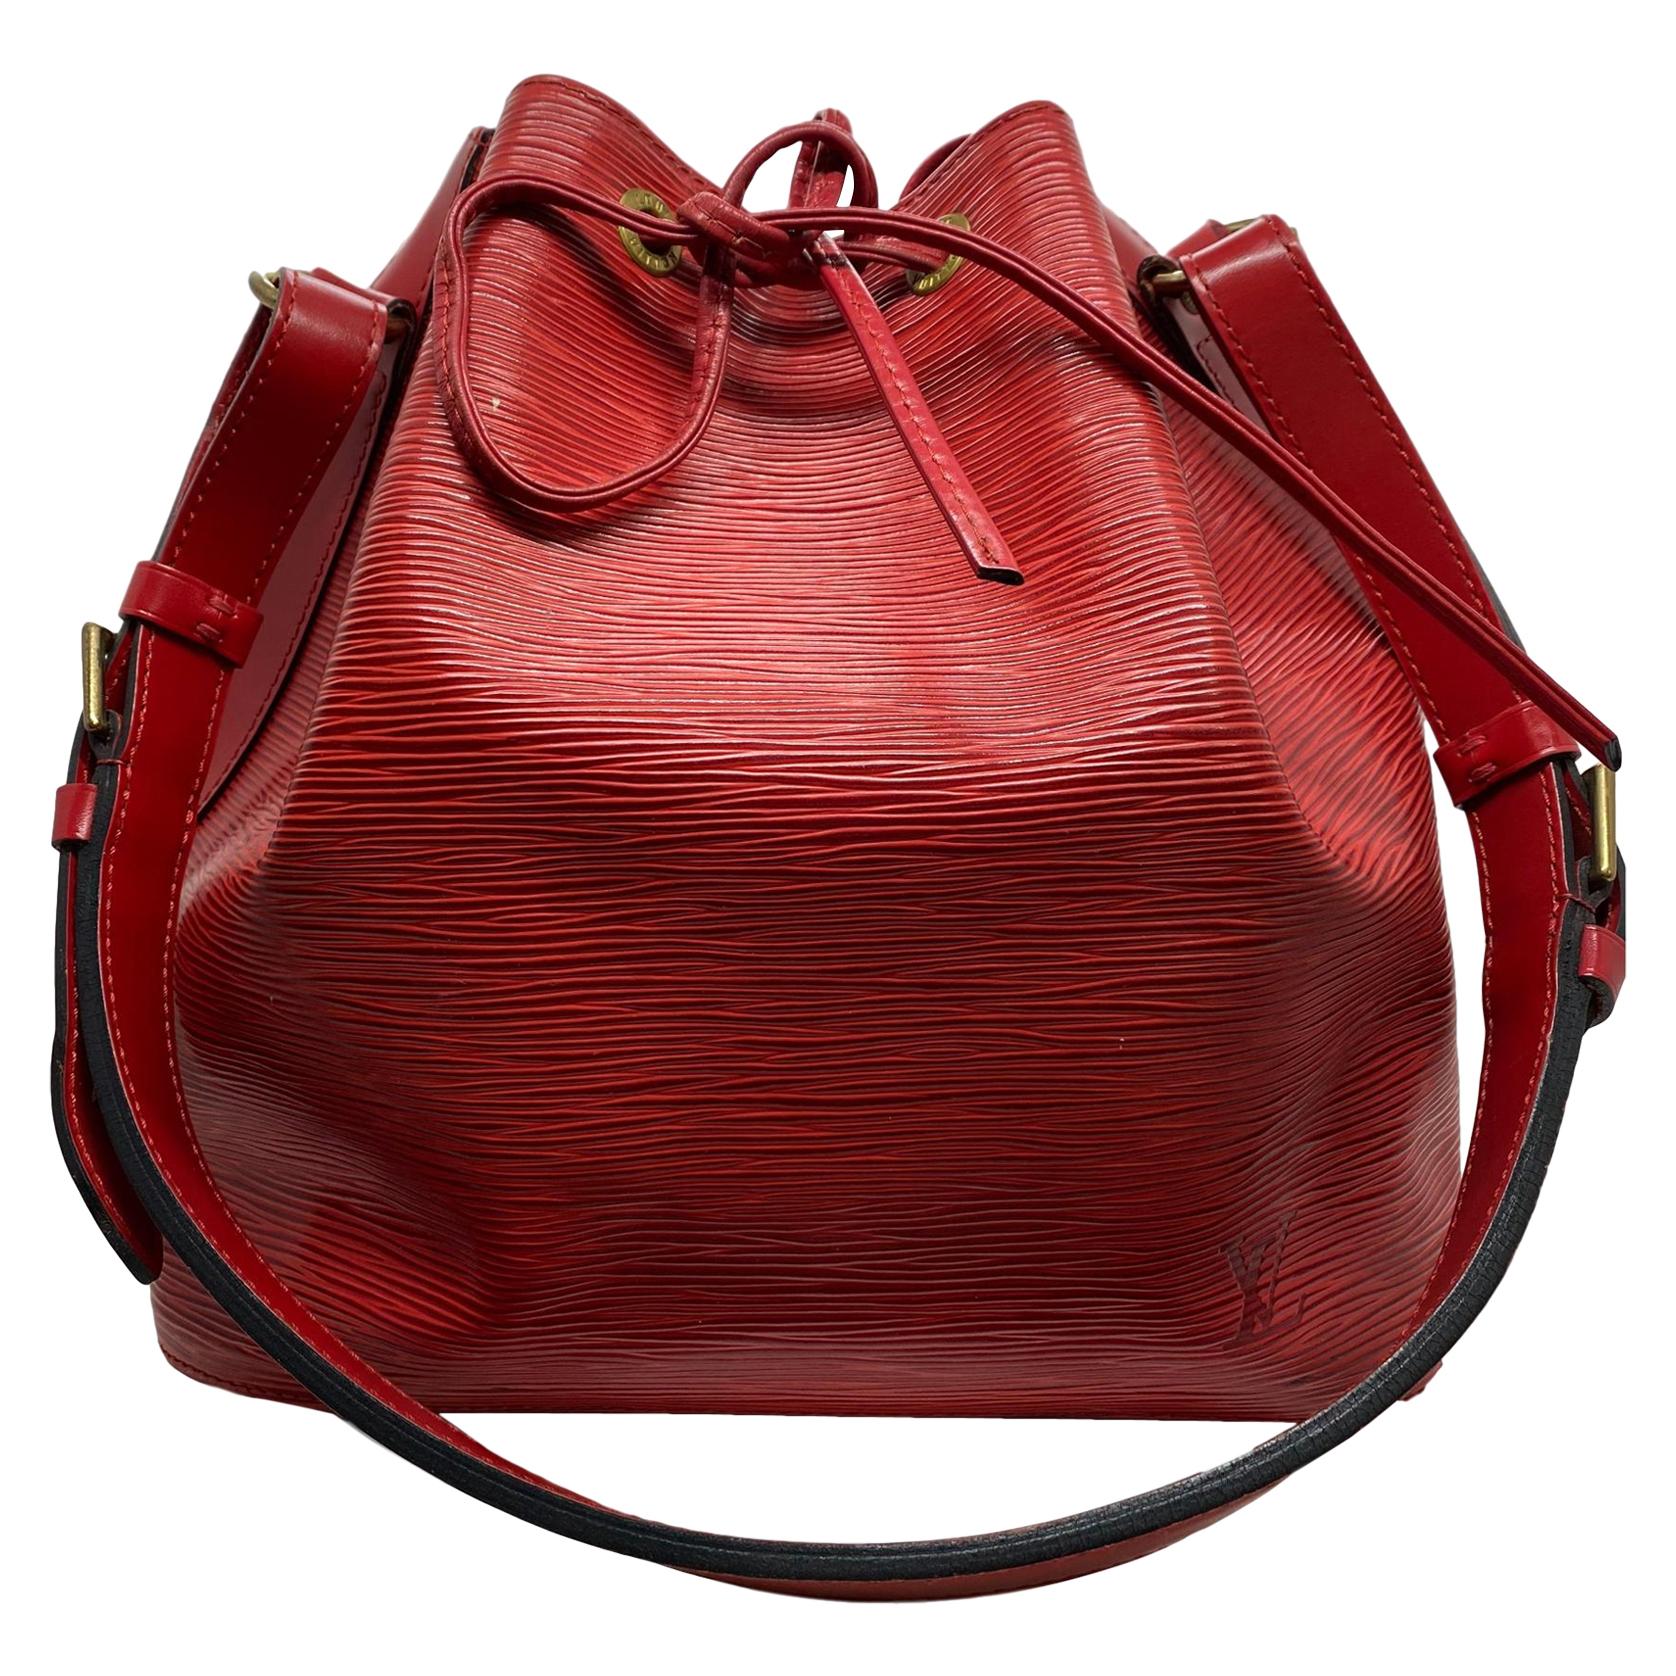 Louis Vuitton Noe PM Bucket Bag in Red EPI Leather, June 1995. at